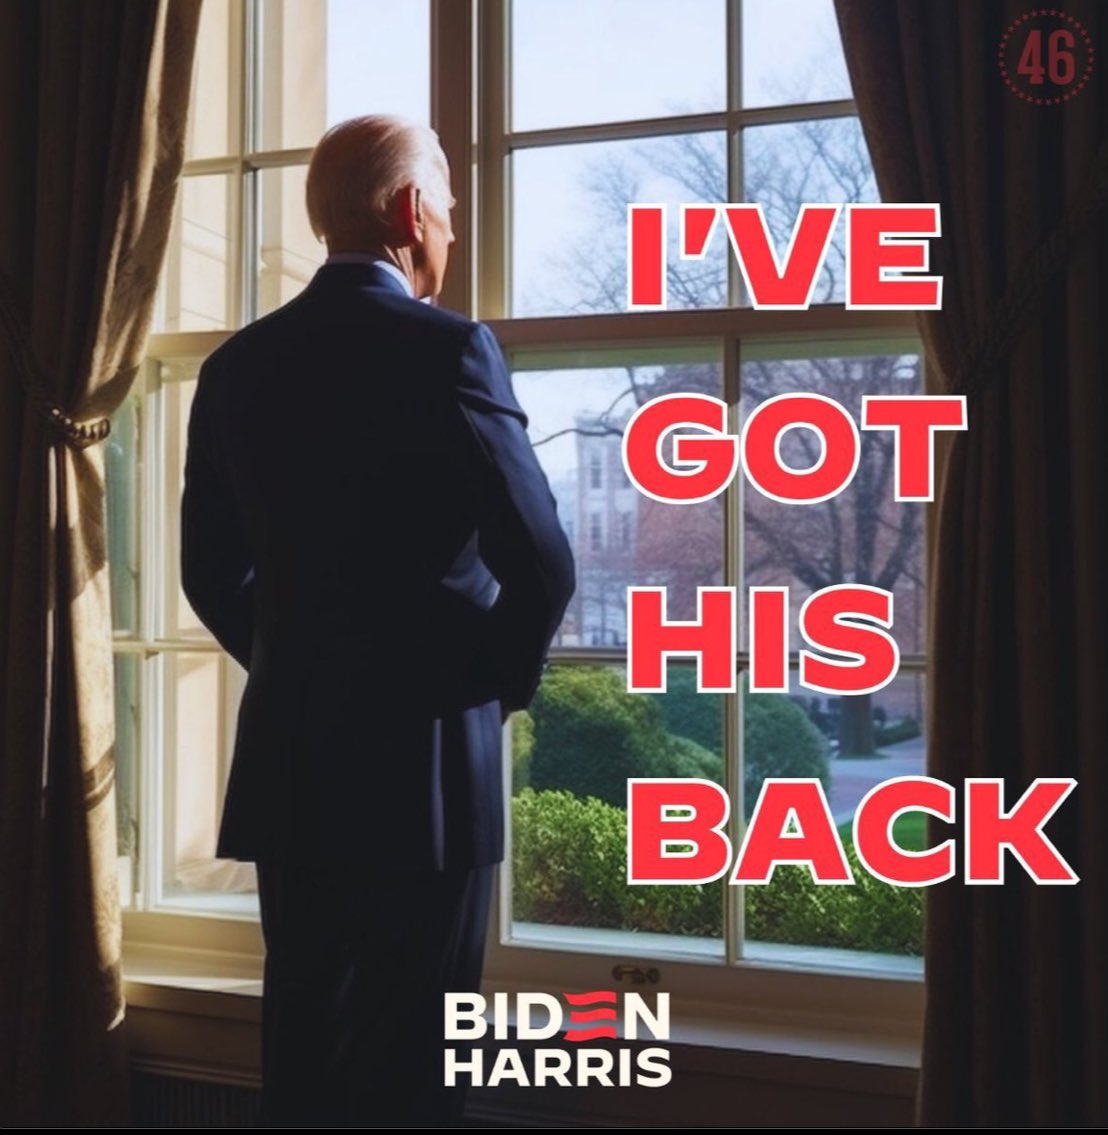 Joe Biden has our backs! Do you have his for four more years? 👇👇👇 Yes or No?